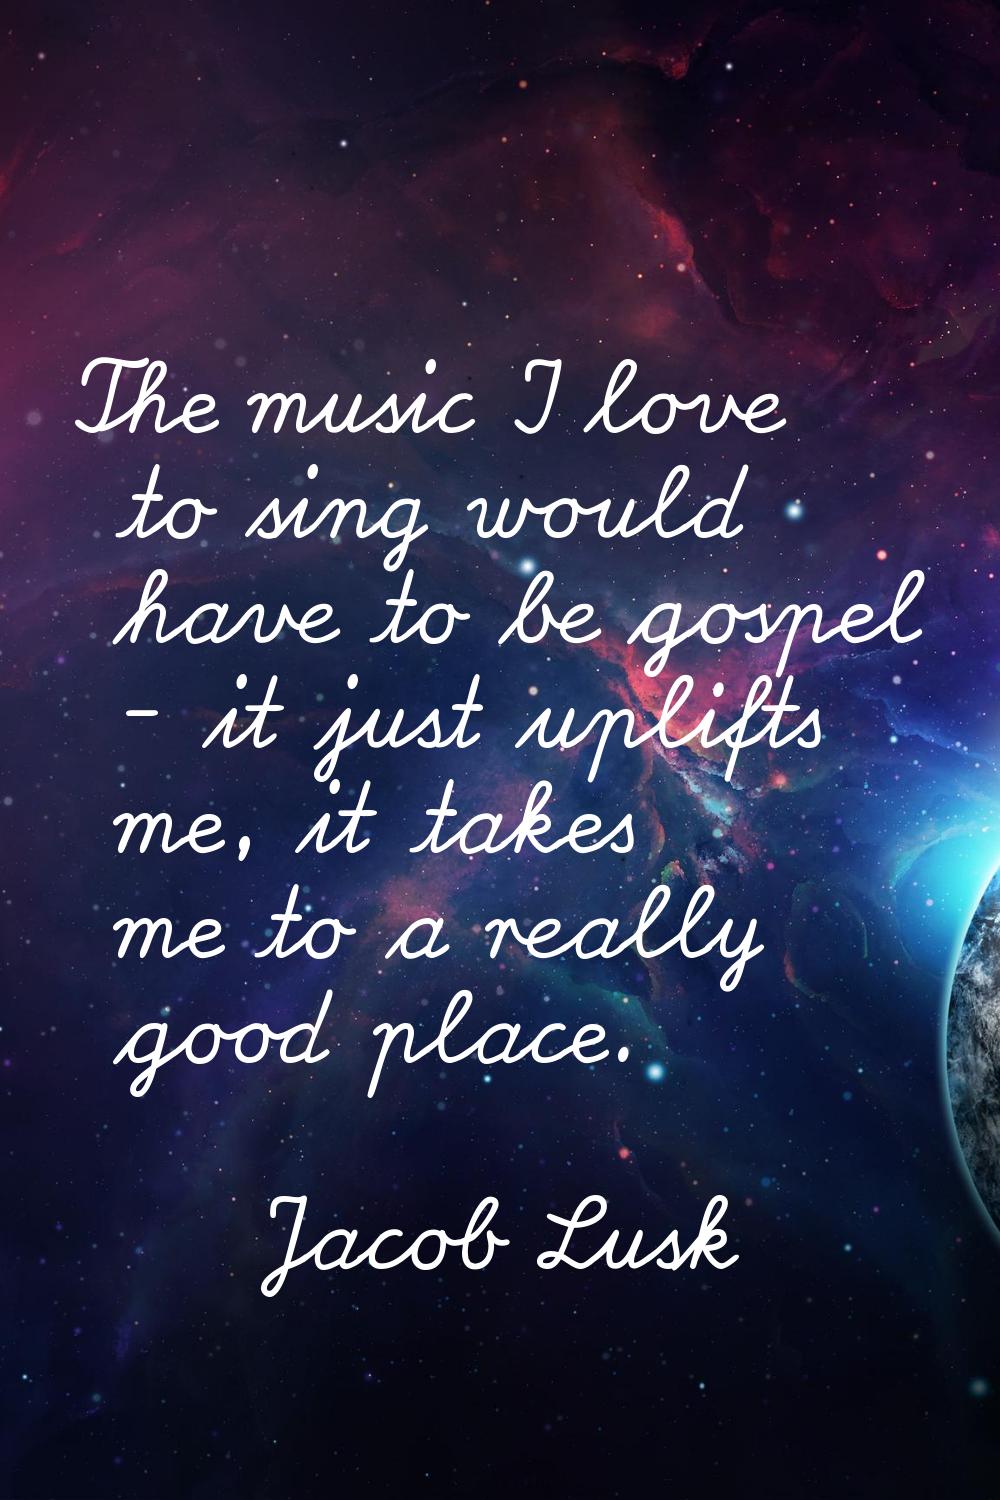 The music I love to sing would have to be gospel - it just uplifts me, it takes me to a really good